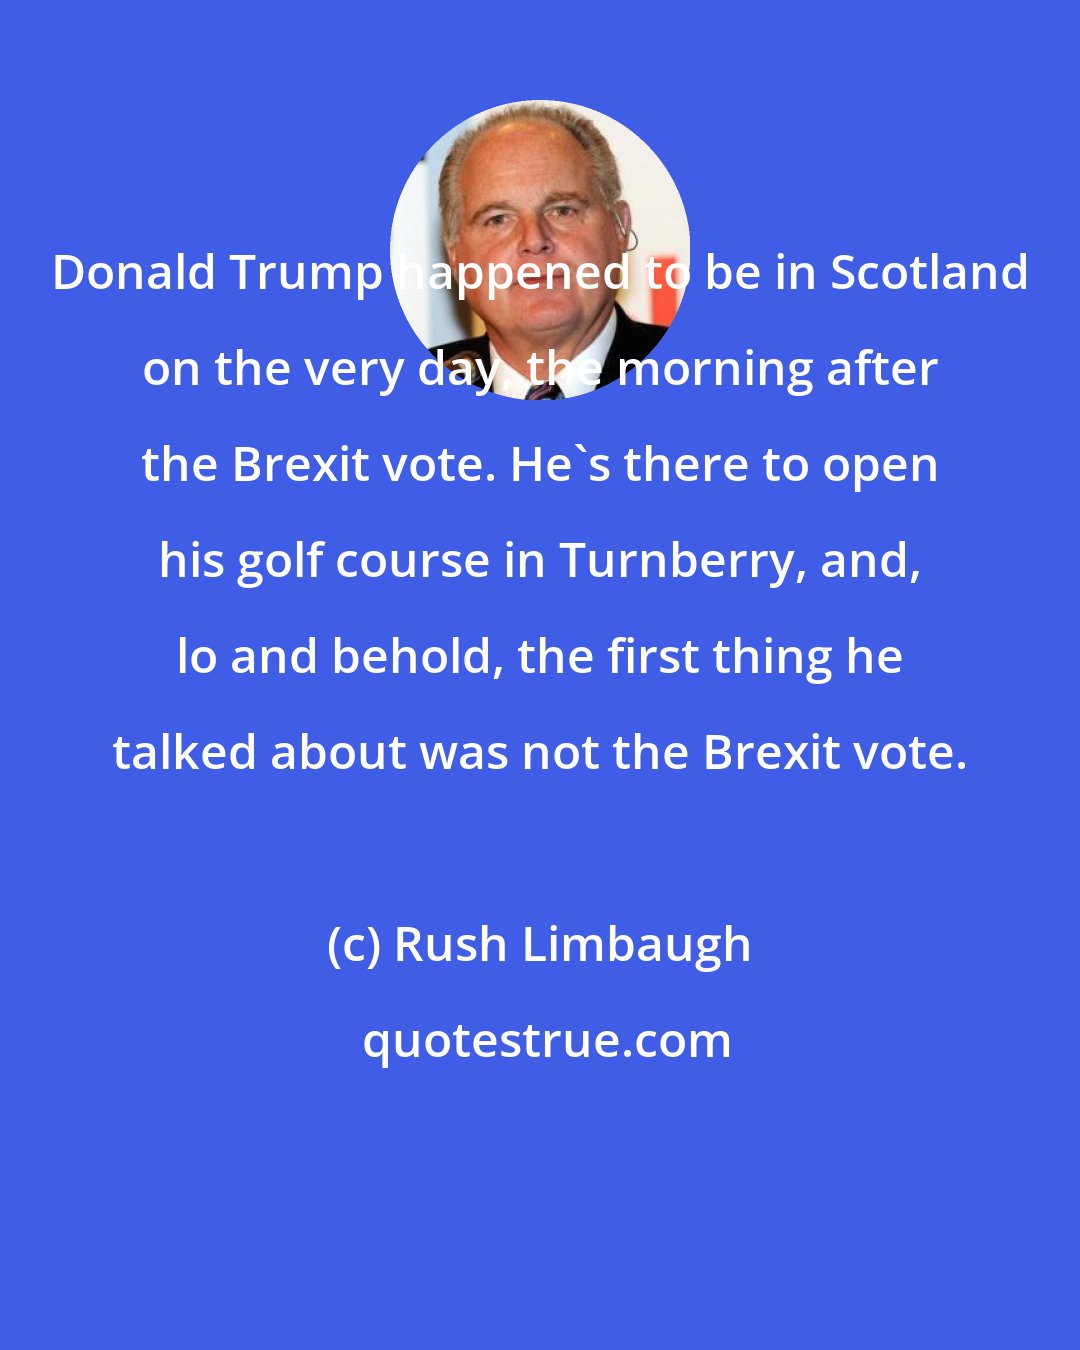 Rush Limbaugh: Donald Trump happened to be in Scotland on the very day, the morning after the Brexit vote. He's there to open his golf course in Turnberry, and, lo and behold, the first thing he talked about was not the Brexit vote.